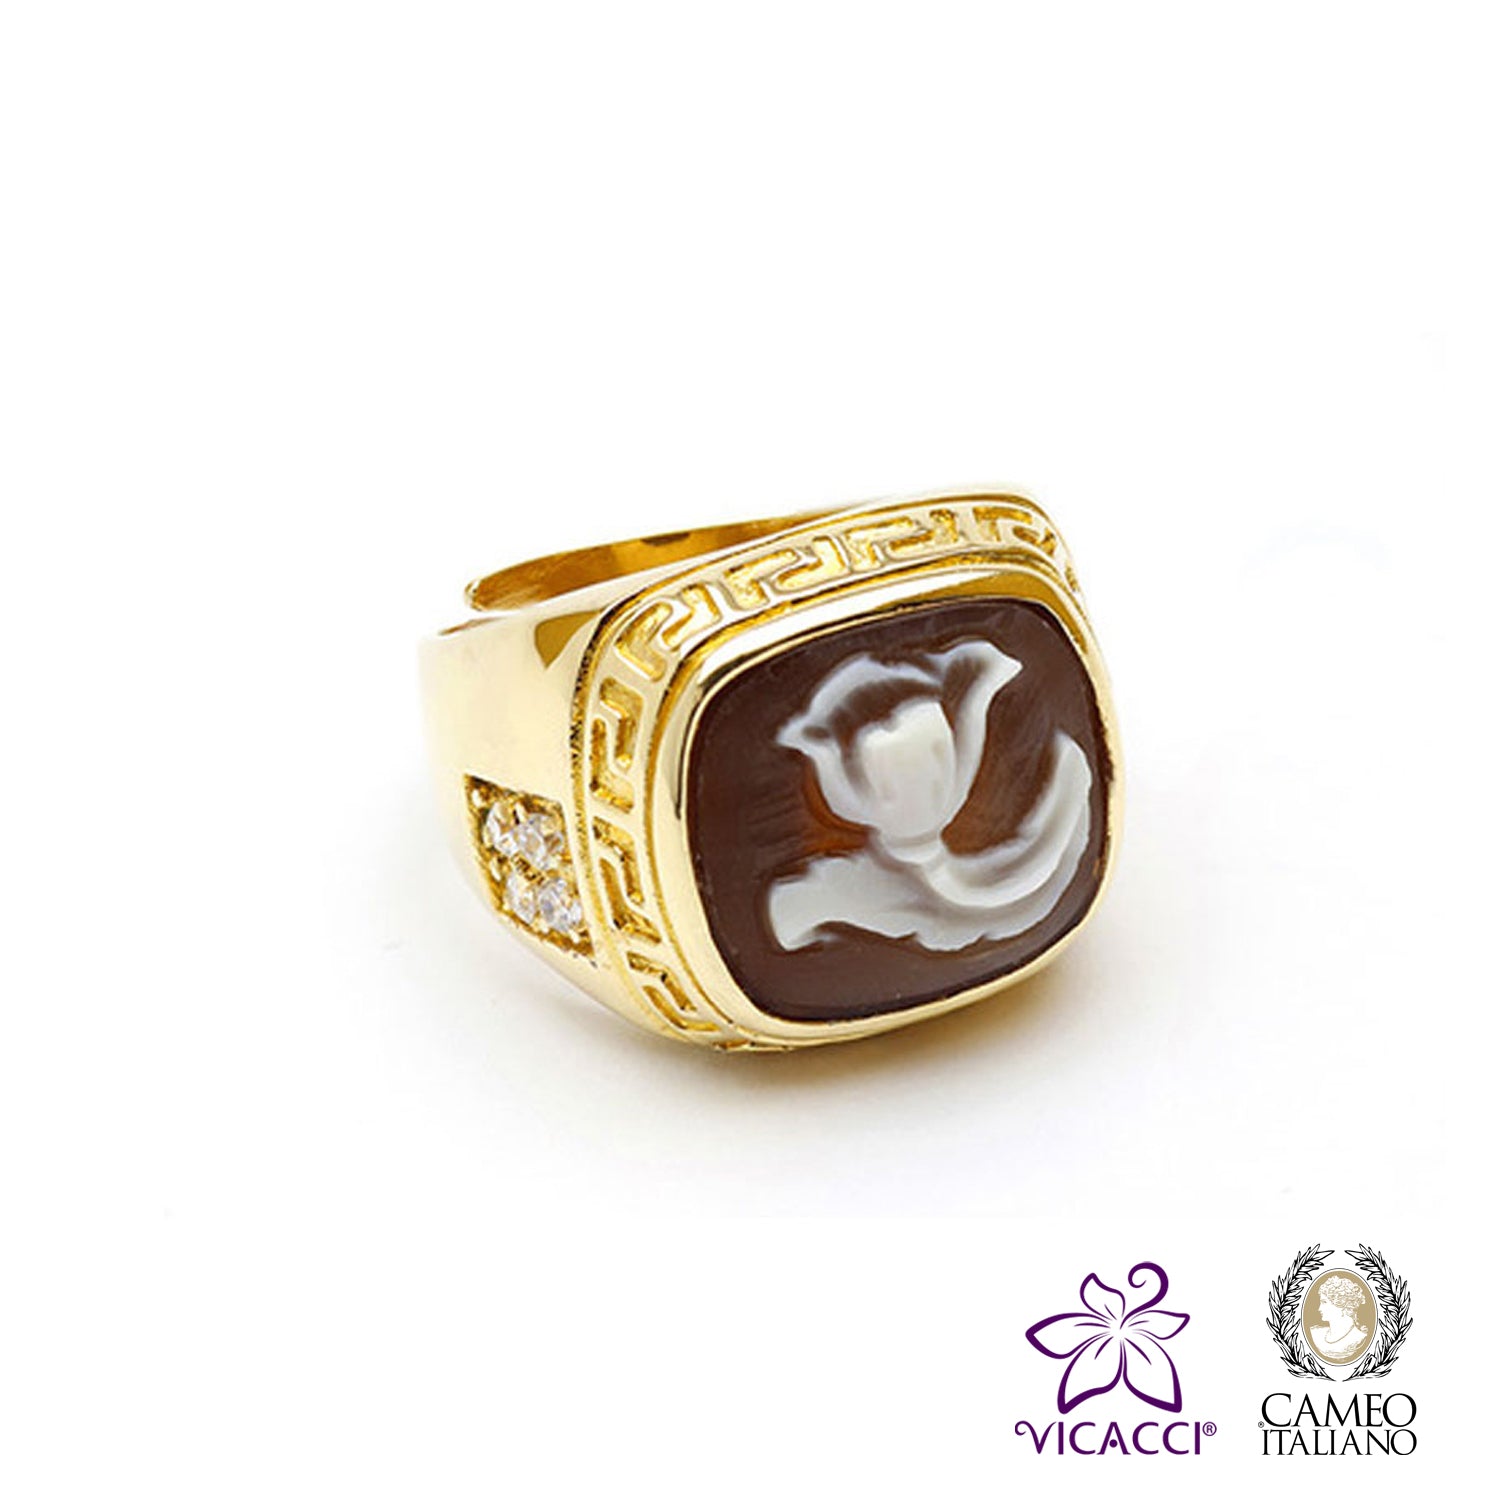 Cameo Italiano, A23 Ring , 925 Sterling Silver Gold Plated